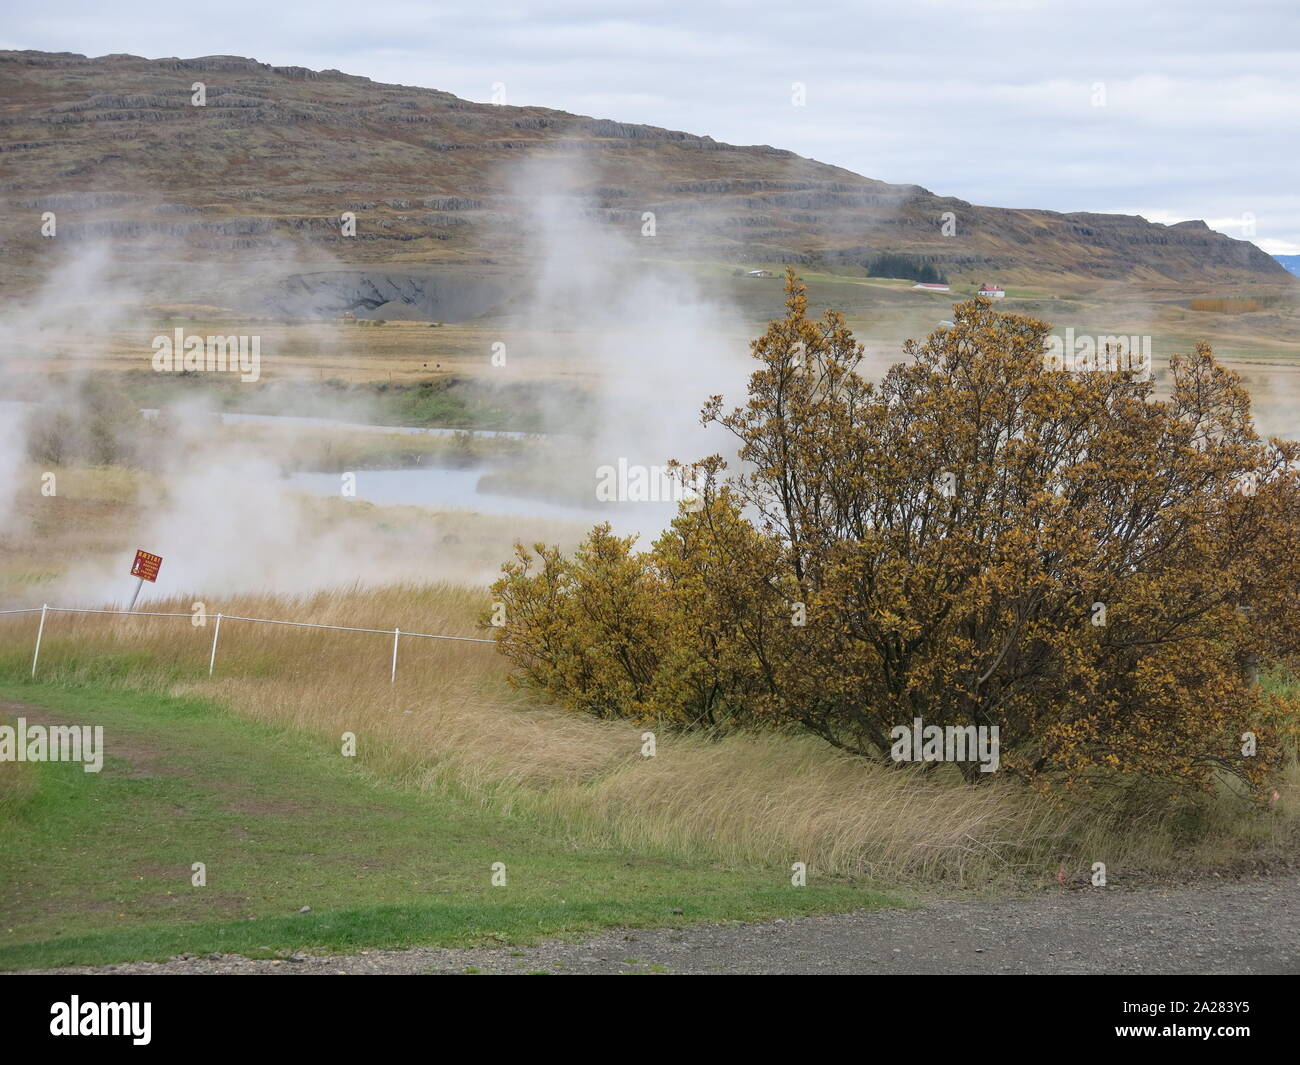 Steam rises from the hot springs at Deildartunguhver in West Iceland, geothermal activity that is a top ten tourist attraction. Stock Photo